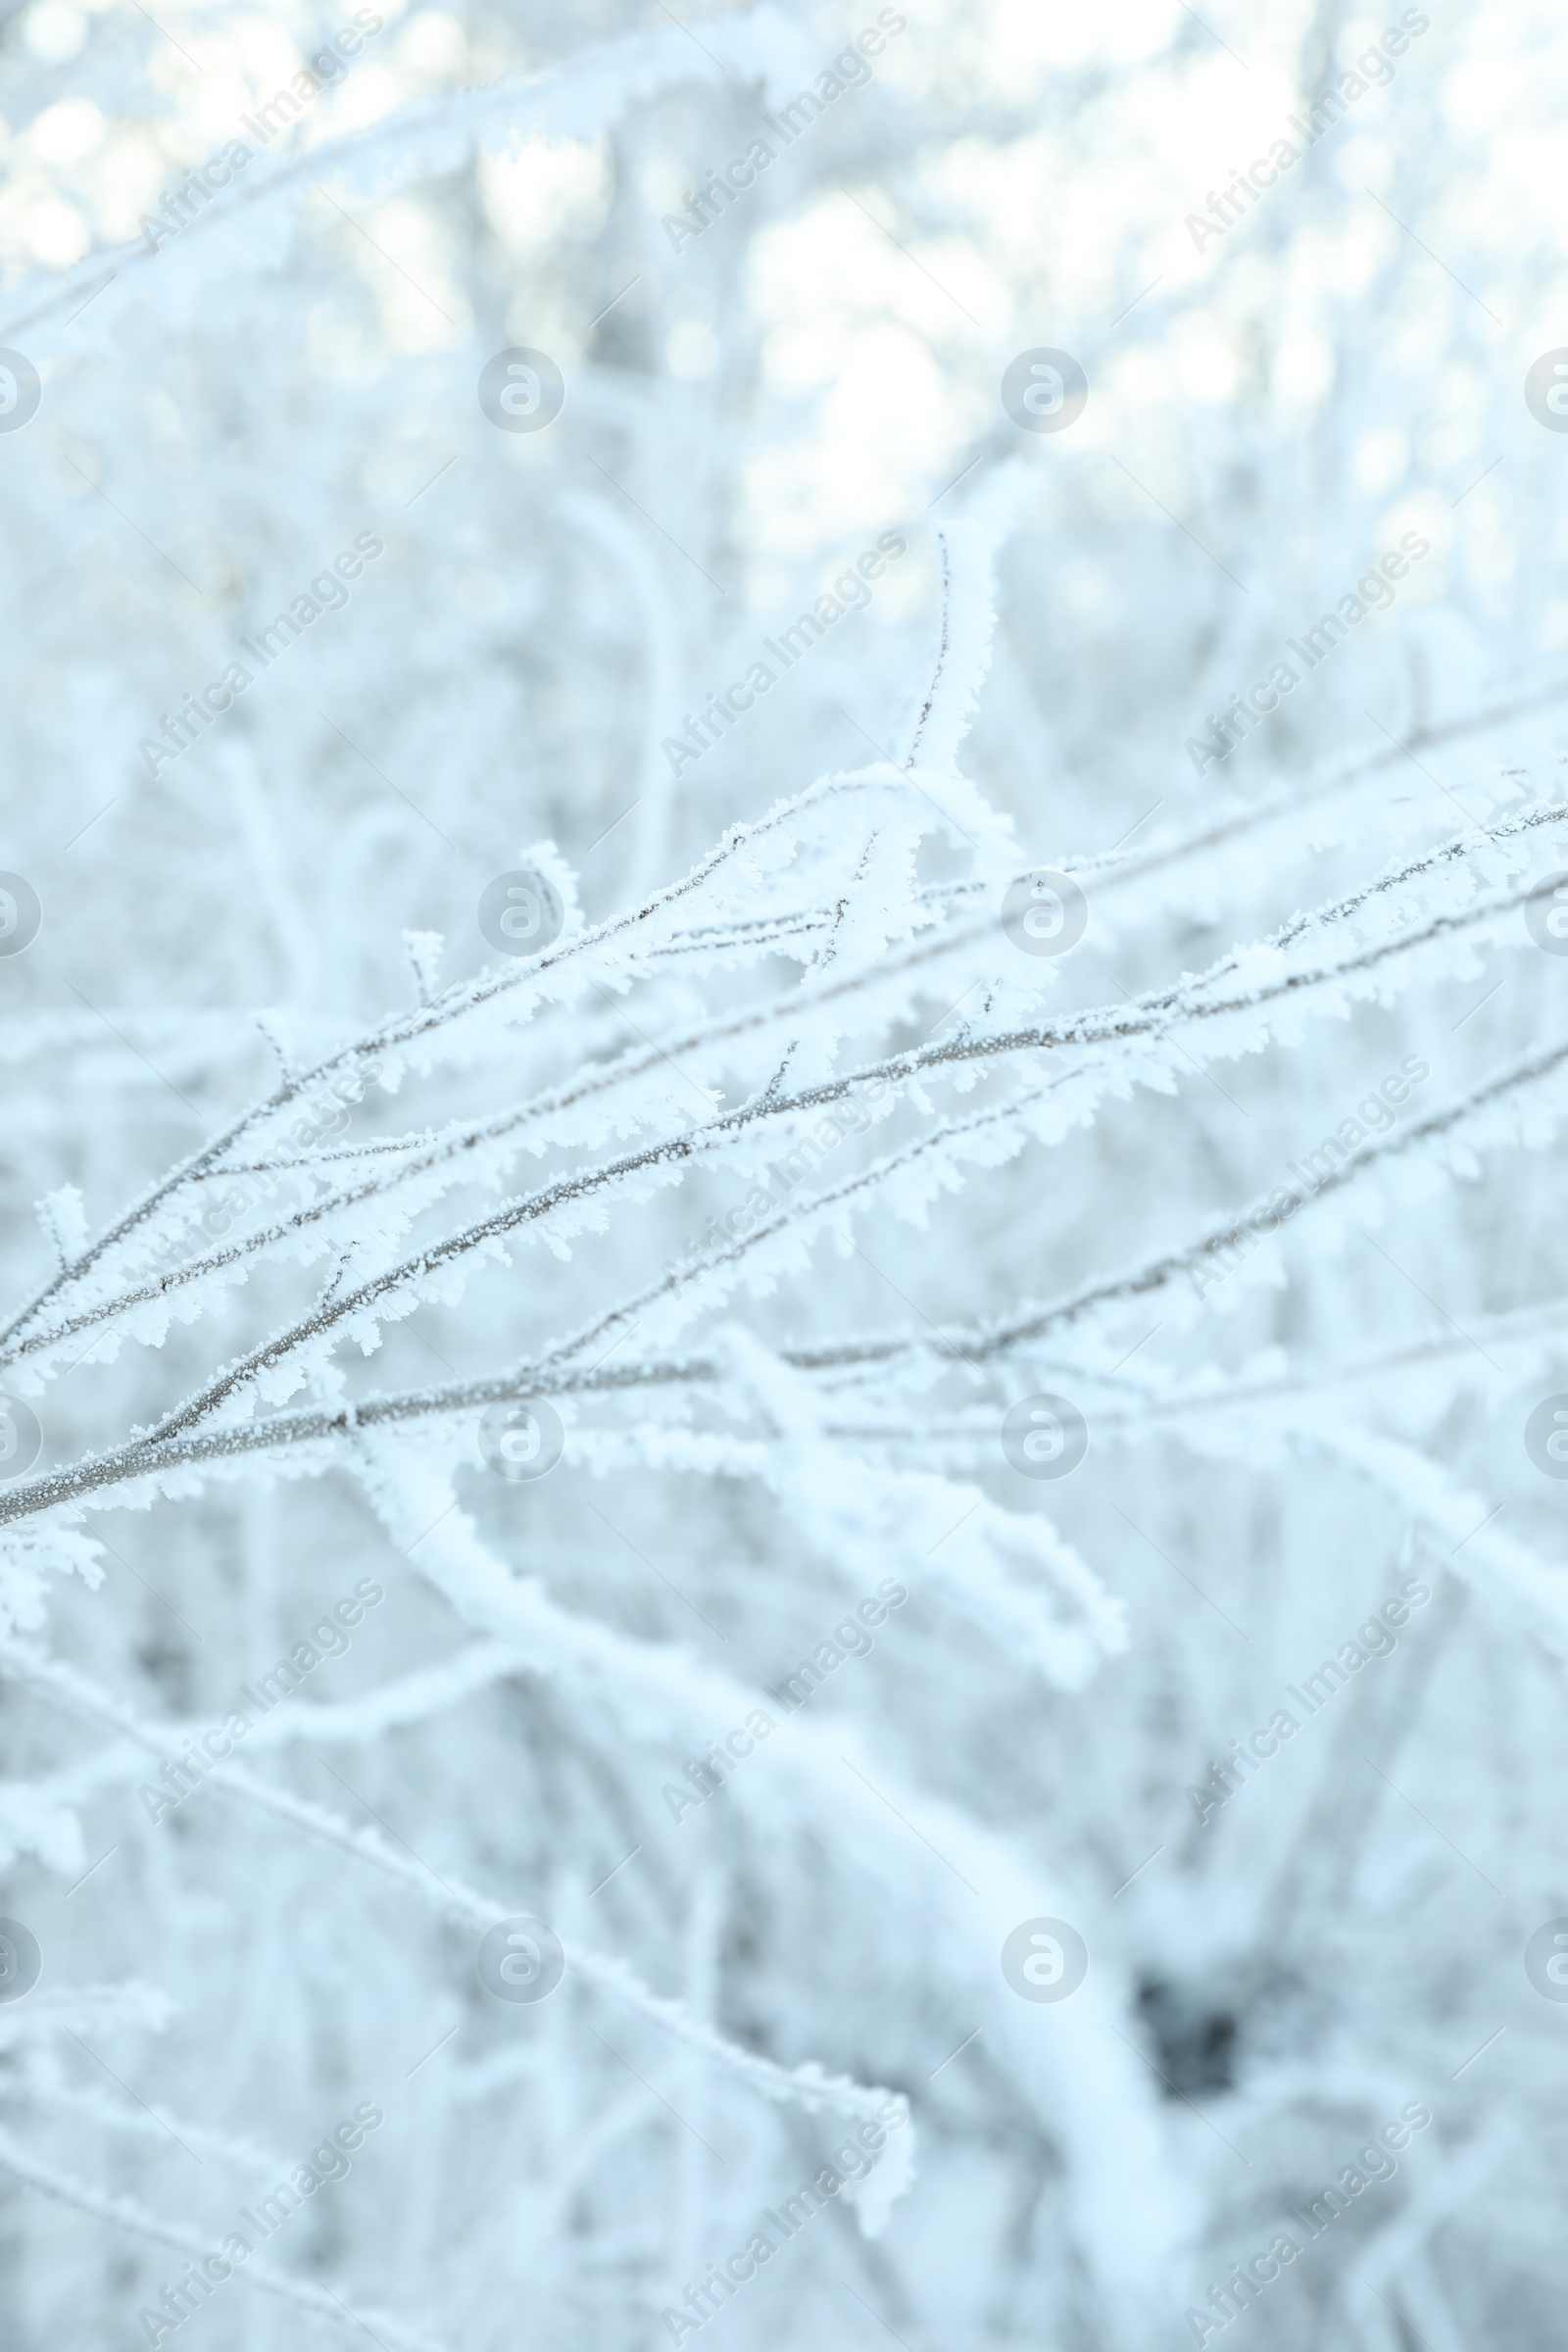 Photo of Frosty branches on blurred background, closeup. Winter season